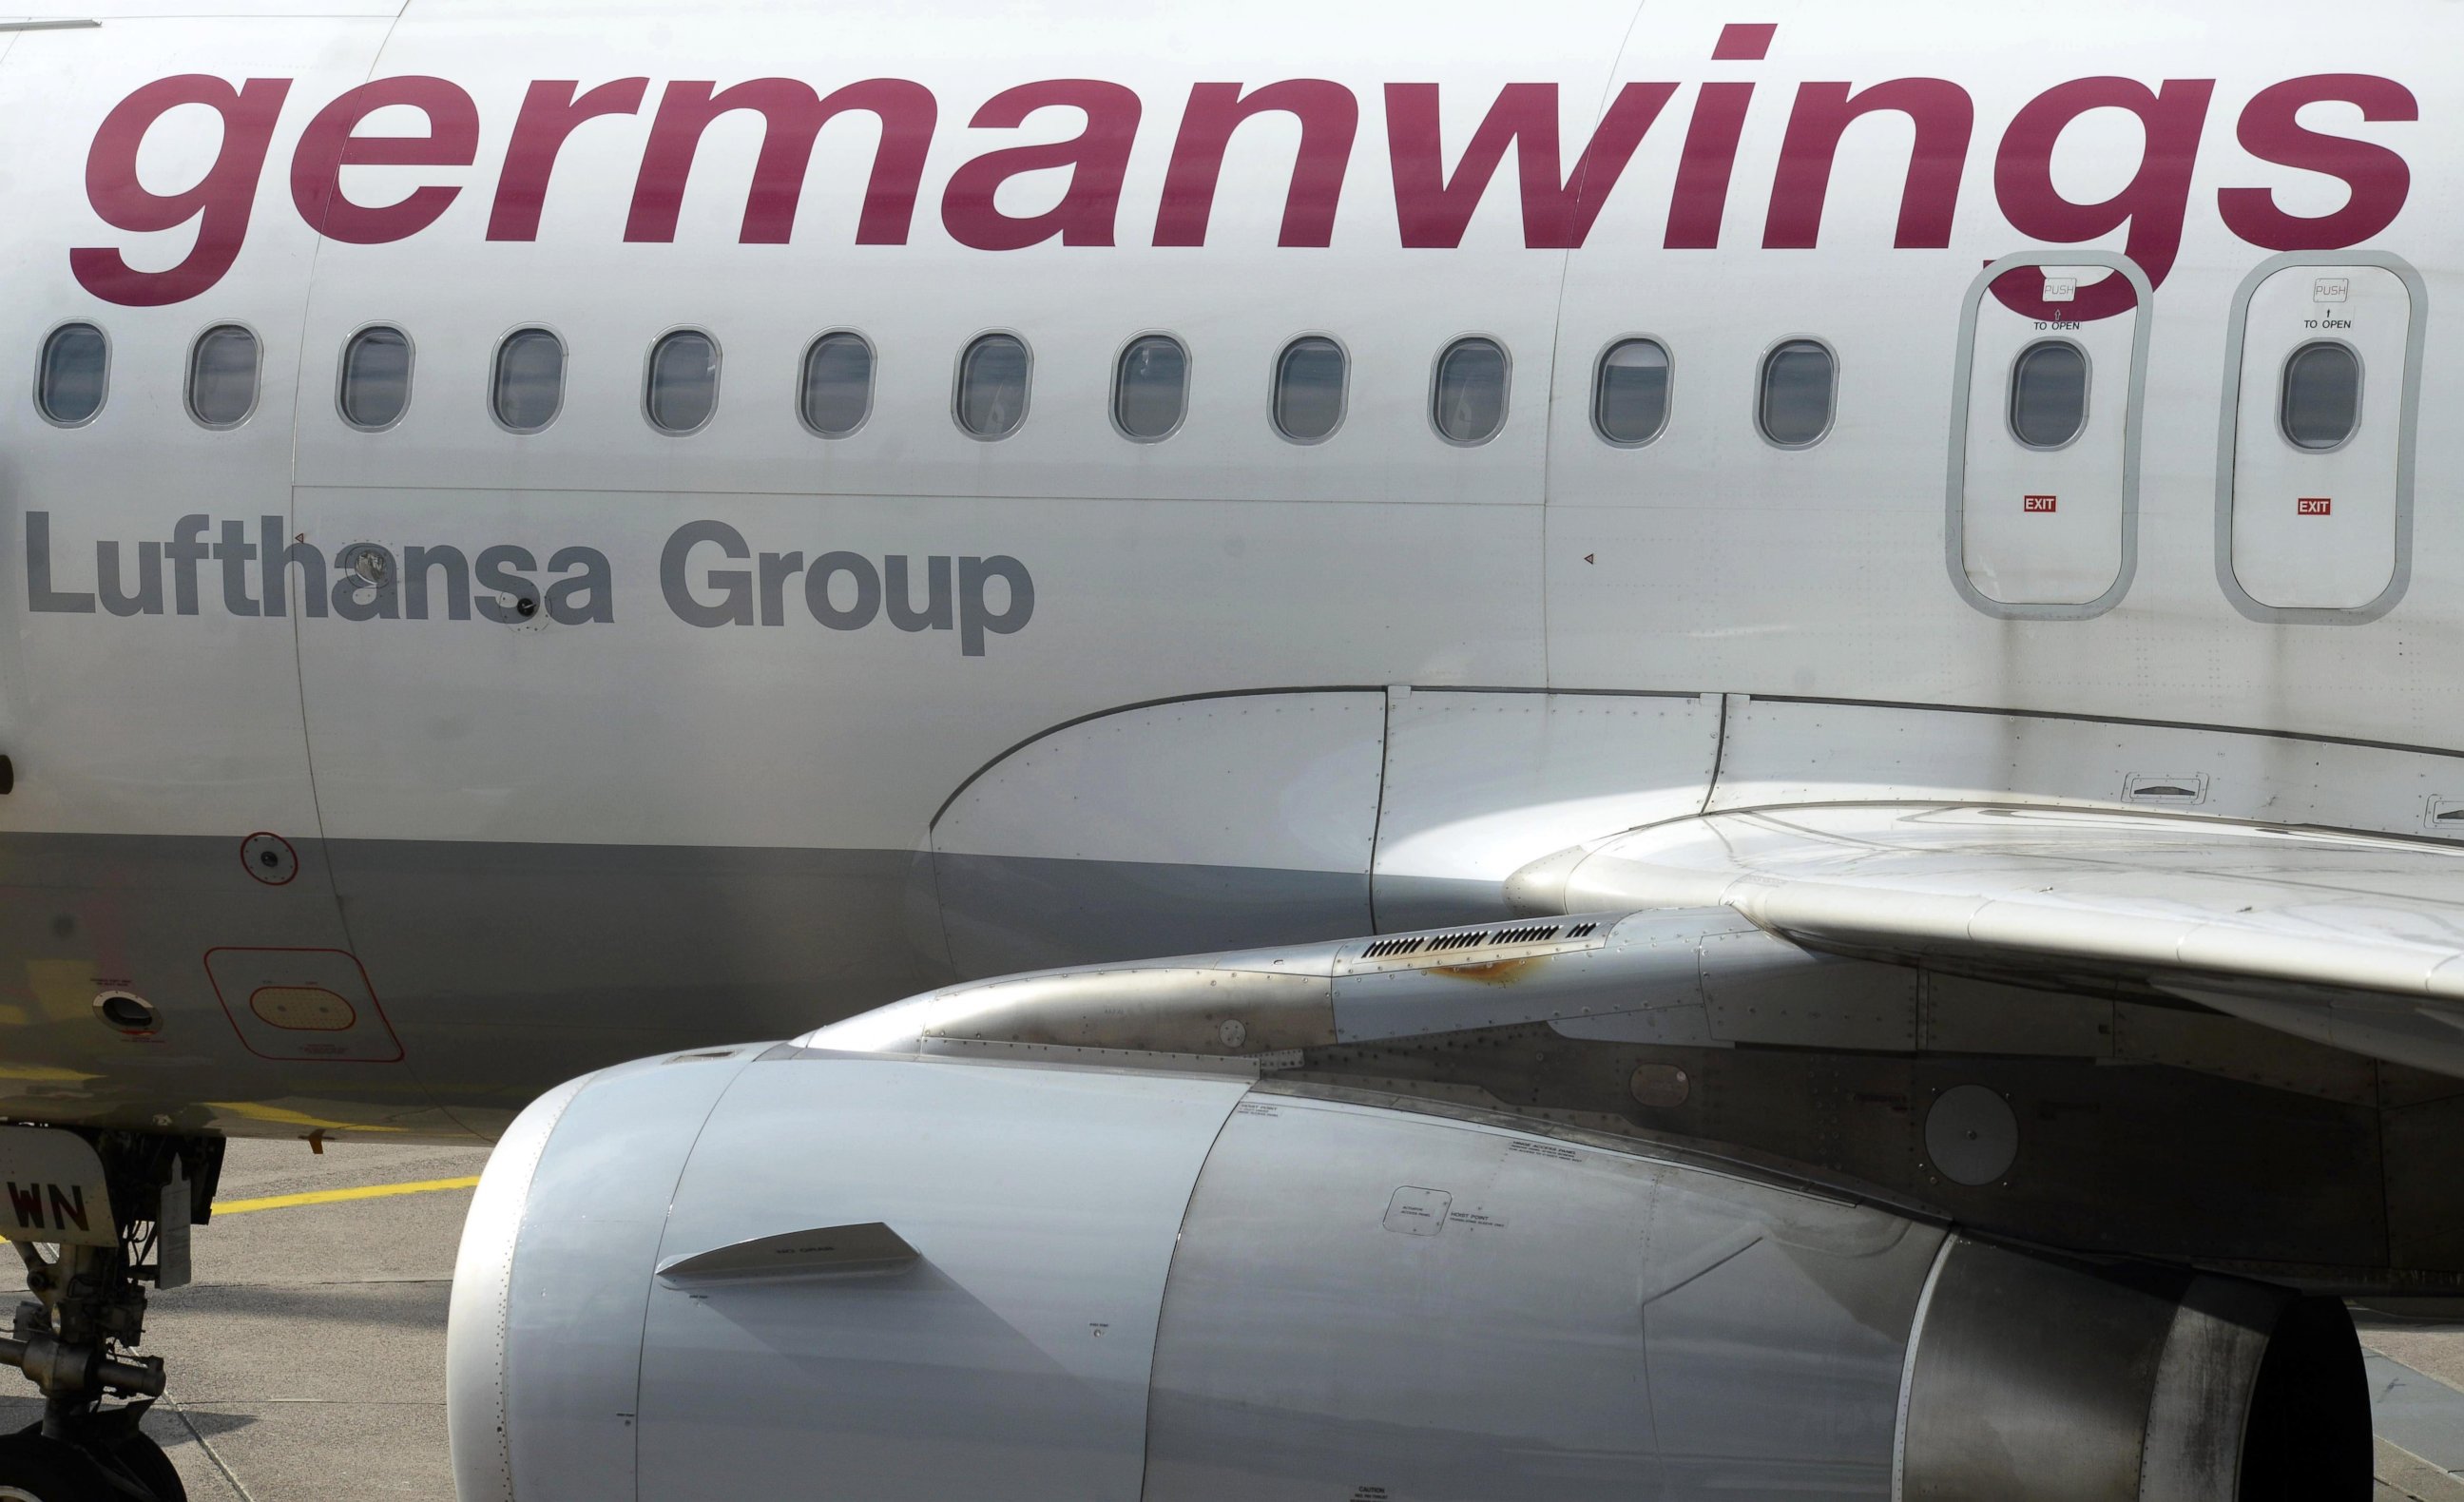 PHOTO: A plane operated by Lufthansa's low-cost subsidiary Germanwings is pictured on August 28, 2014 at Cologne's airport.